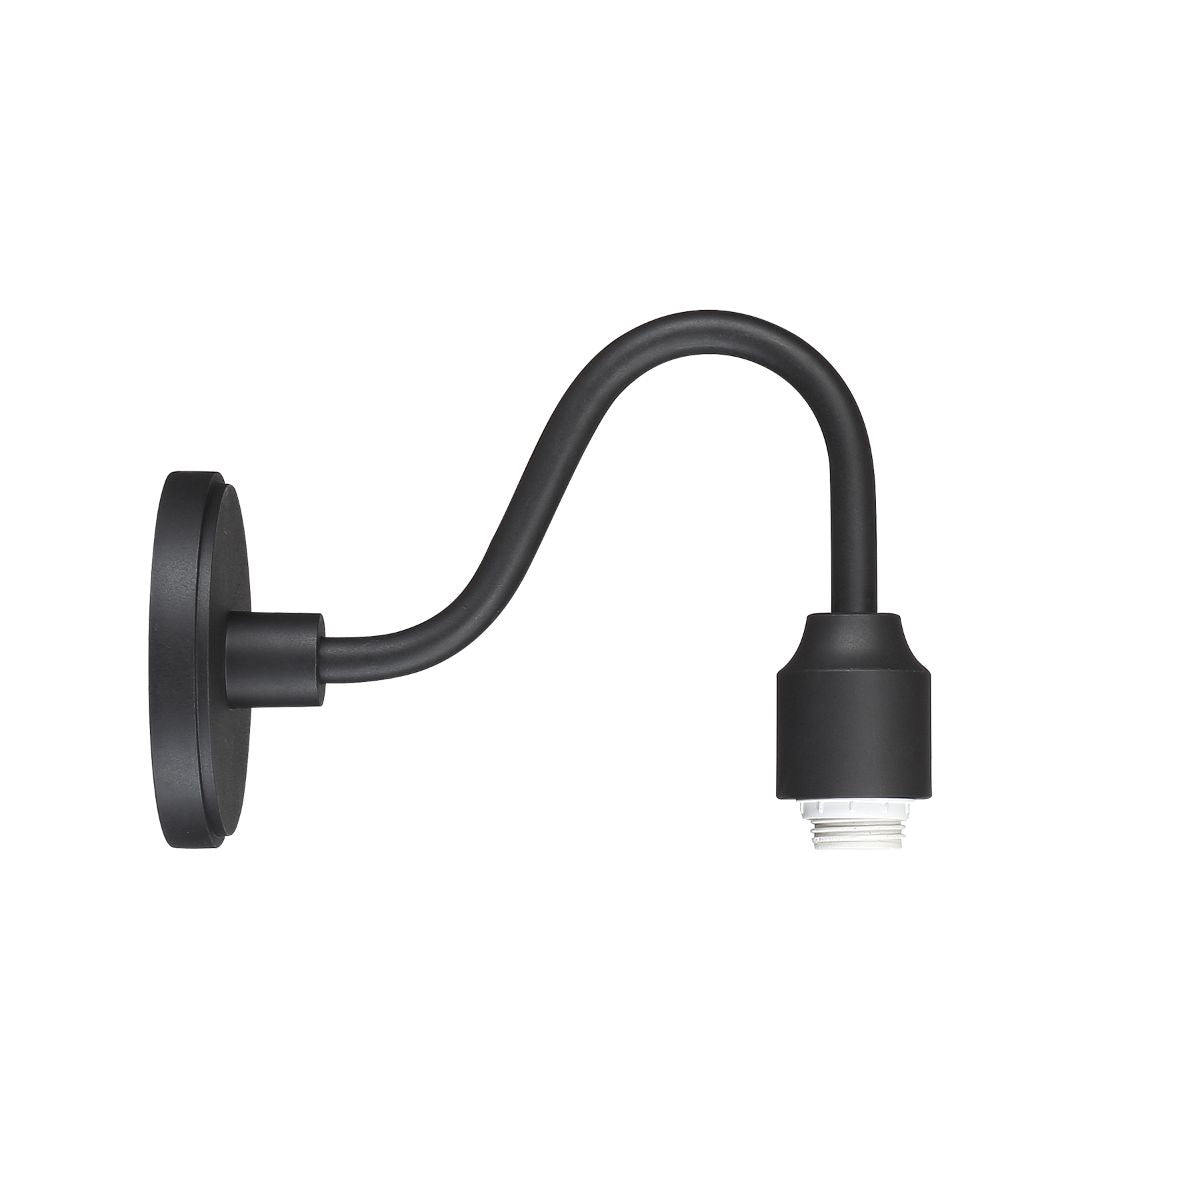 RLM Outdoor Wall Mount 12 In. Curved Arm Black Finish